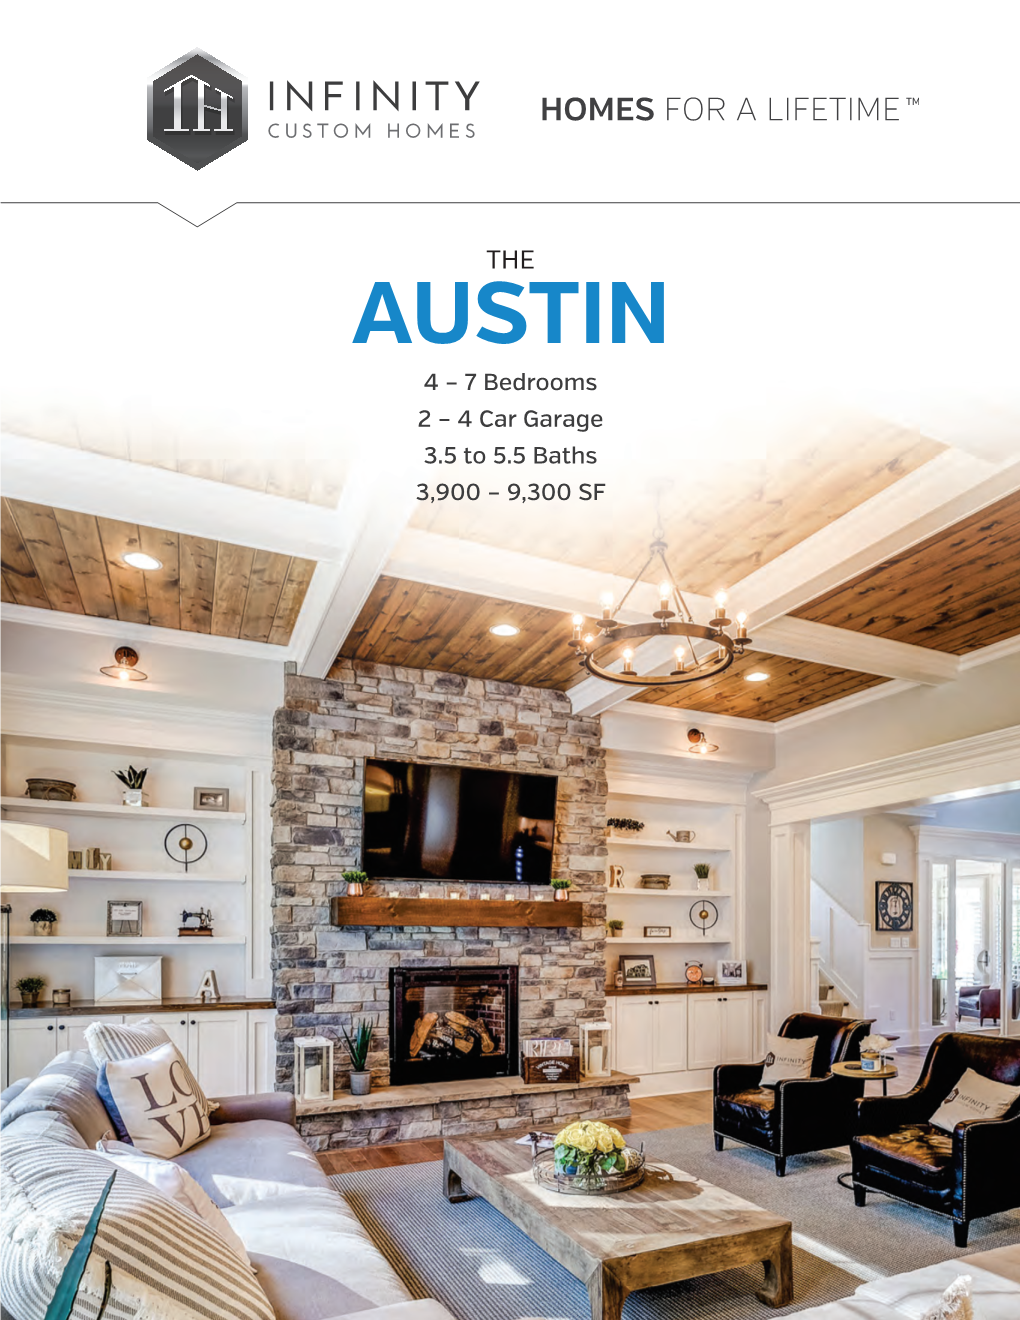 AUSTIN 4 – 7 Bedrooms 2 – 4 Car Garage 3.5 to 5.5 Baths 3,900 – 9,300 SF ARCHITECTURAL INSPIRATIONS